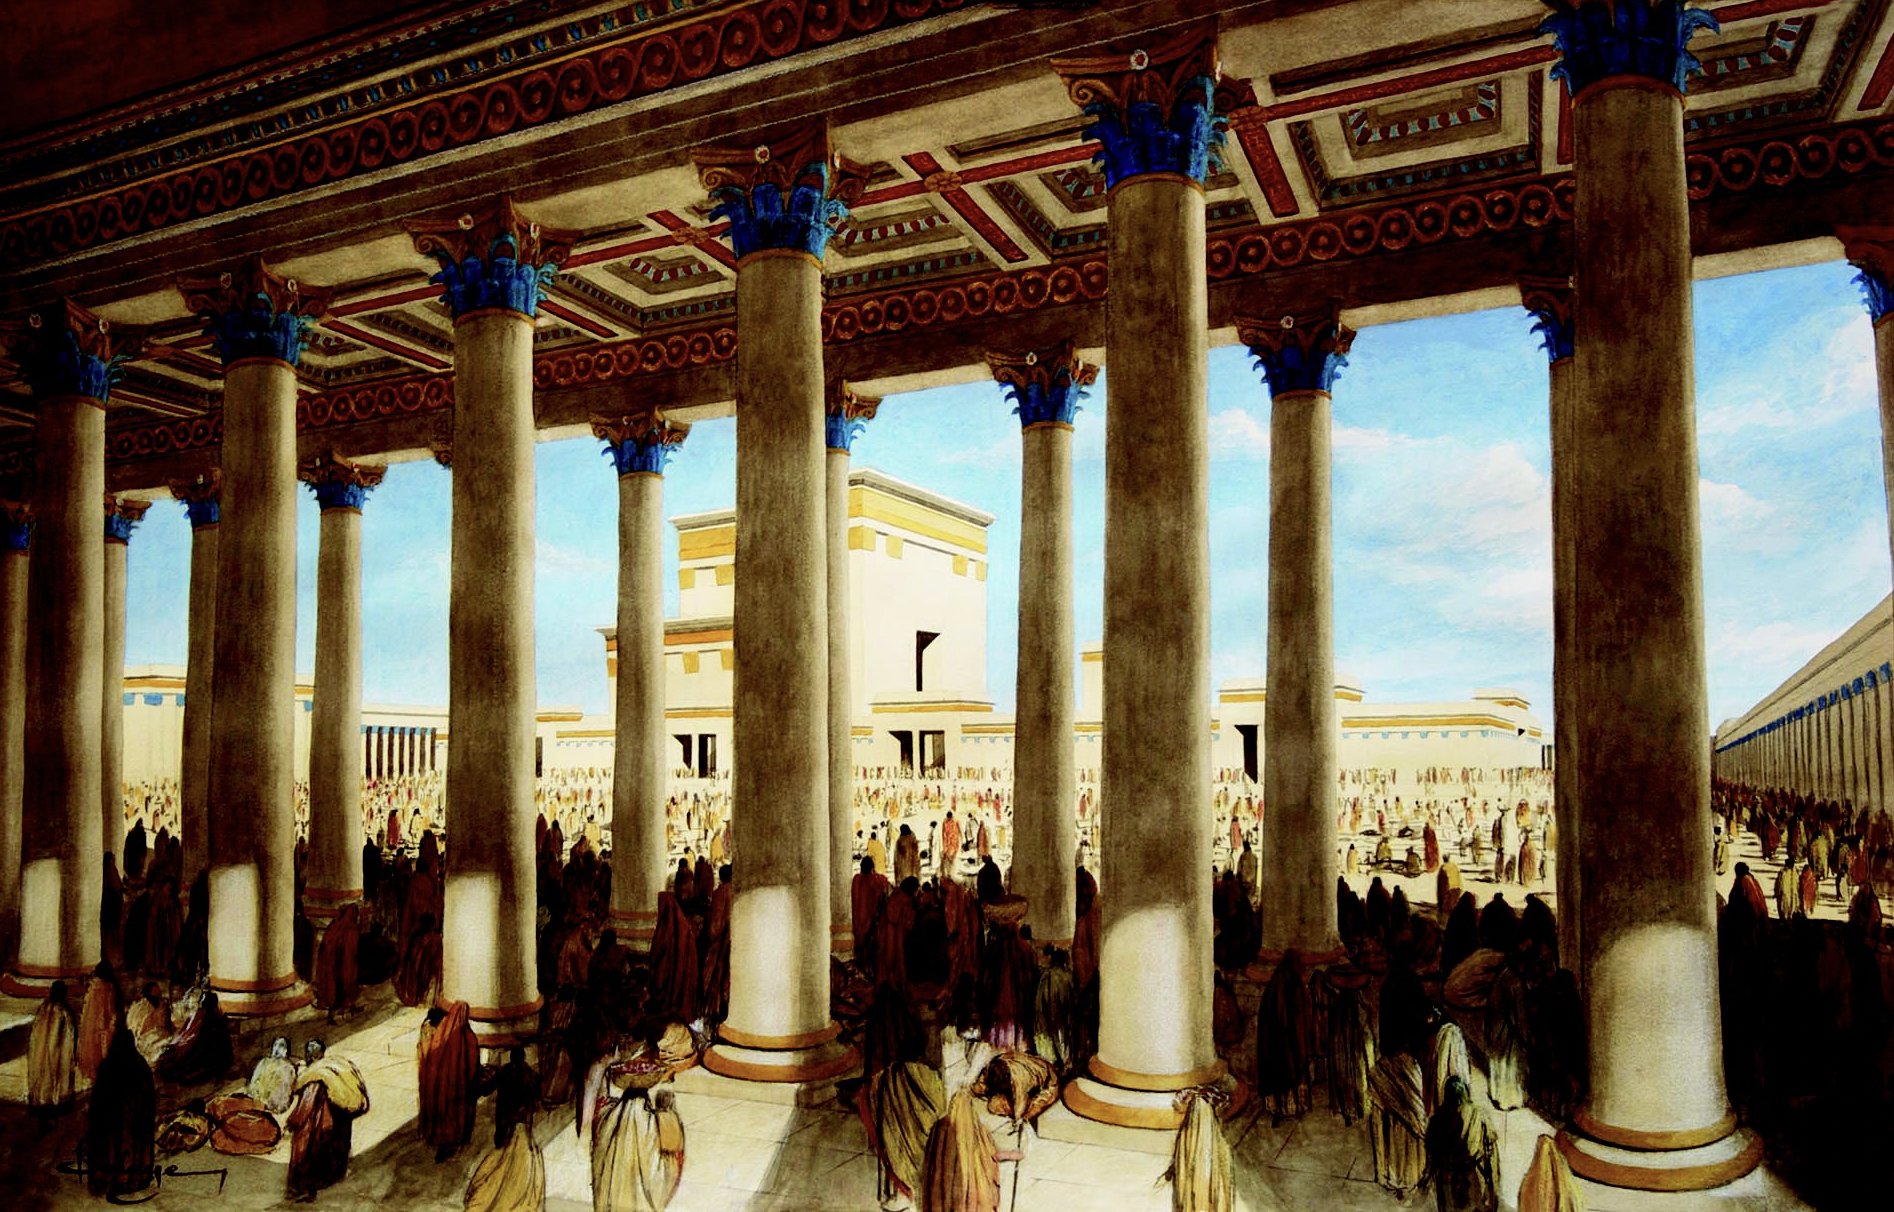 Passover at Herod's Temple in 1st century Jerusalem.